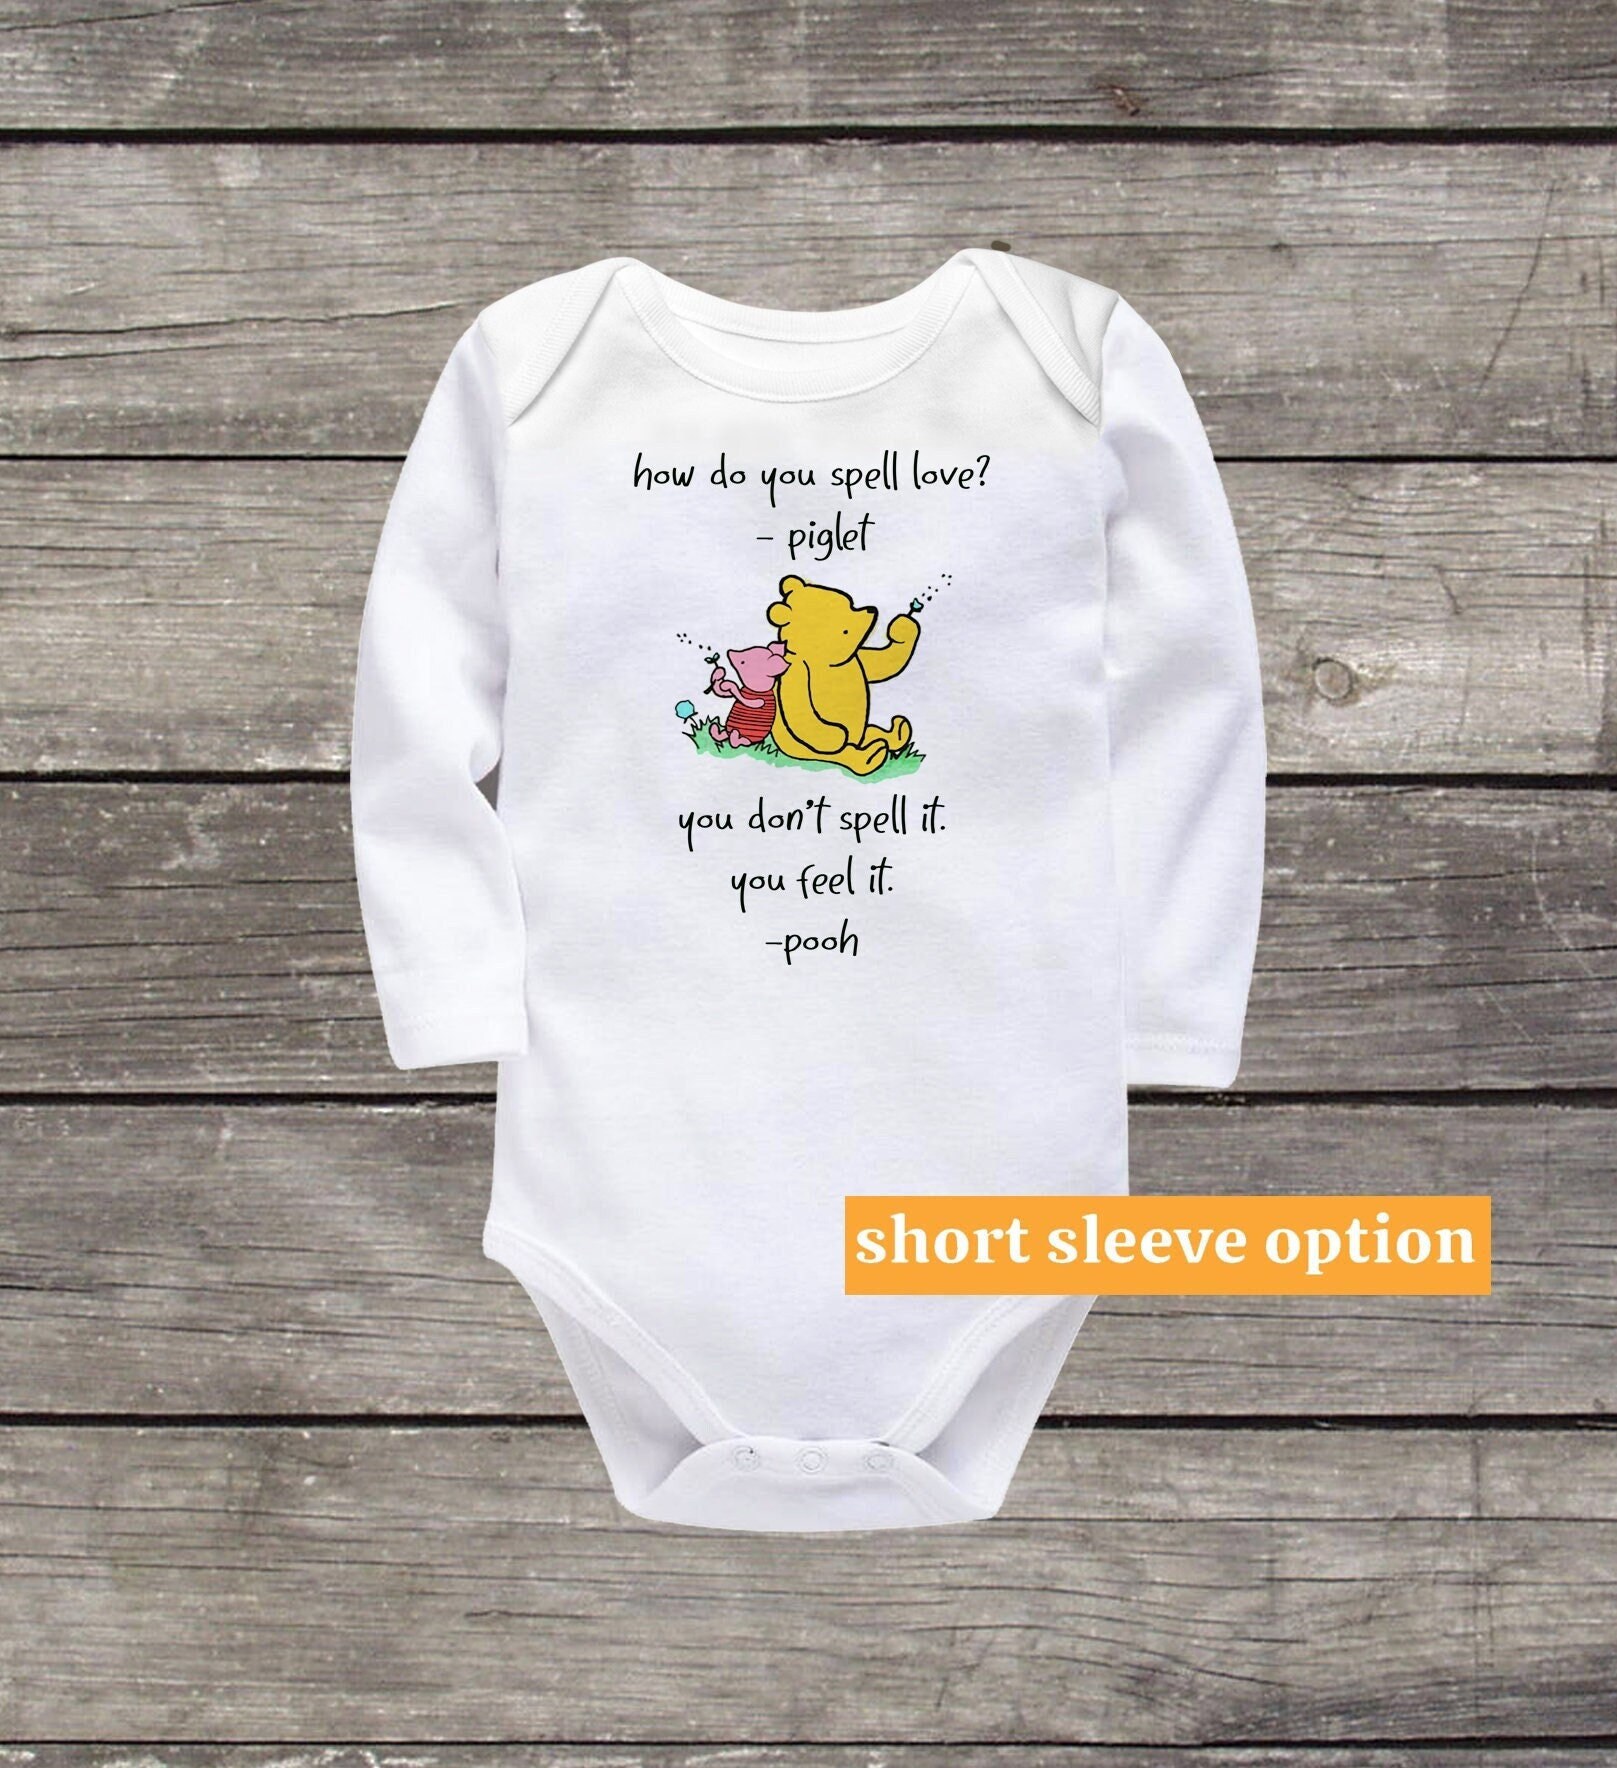 Best part of tomorrow 8 piece Winnie the Pooh classic baby basket-baby shower gift Clothing Unisex Kids Clothing Unisex Baby Clothing Bodysuits newborn gift winnie,Disney neutral baby,pregnancy gift 